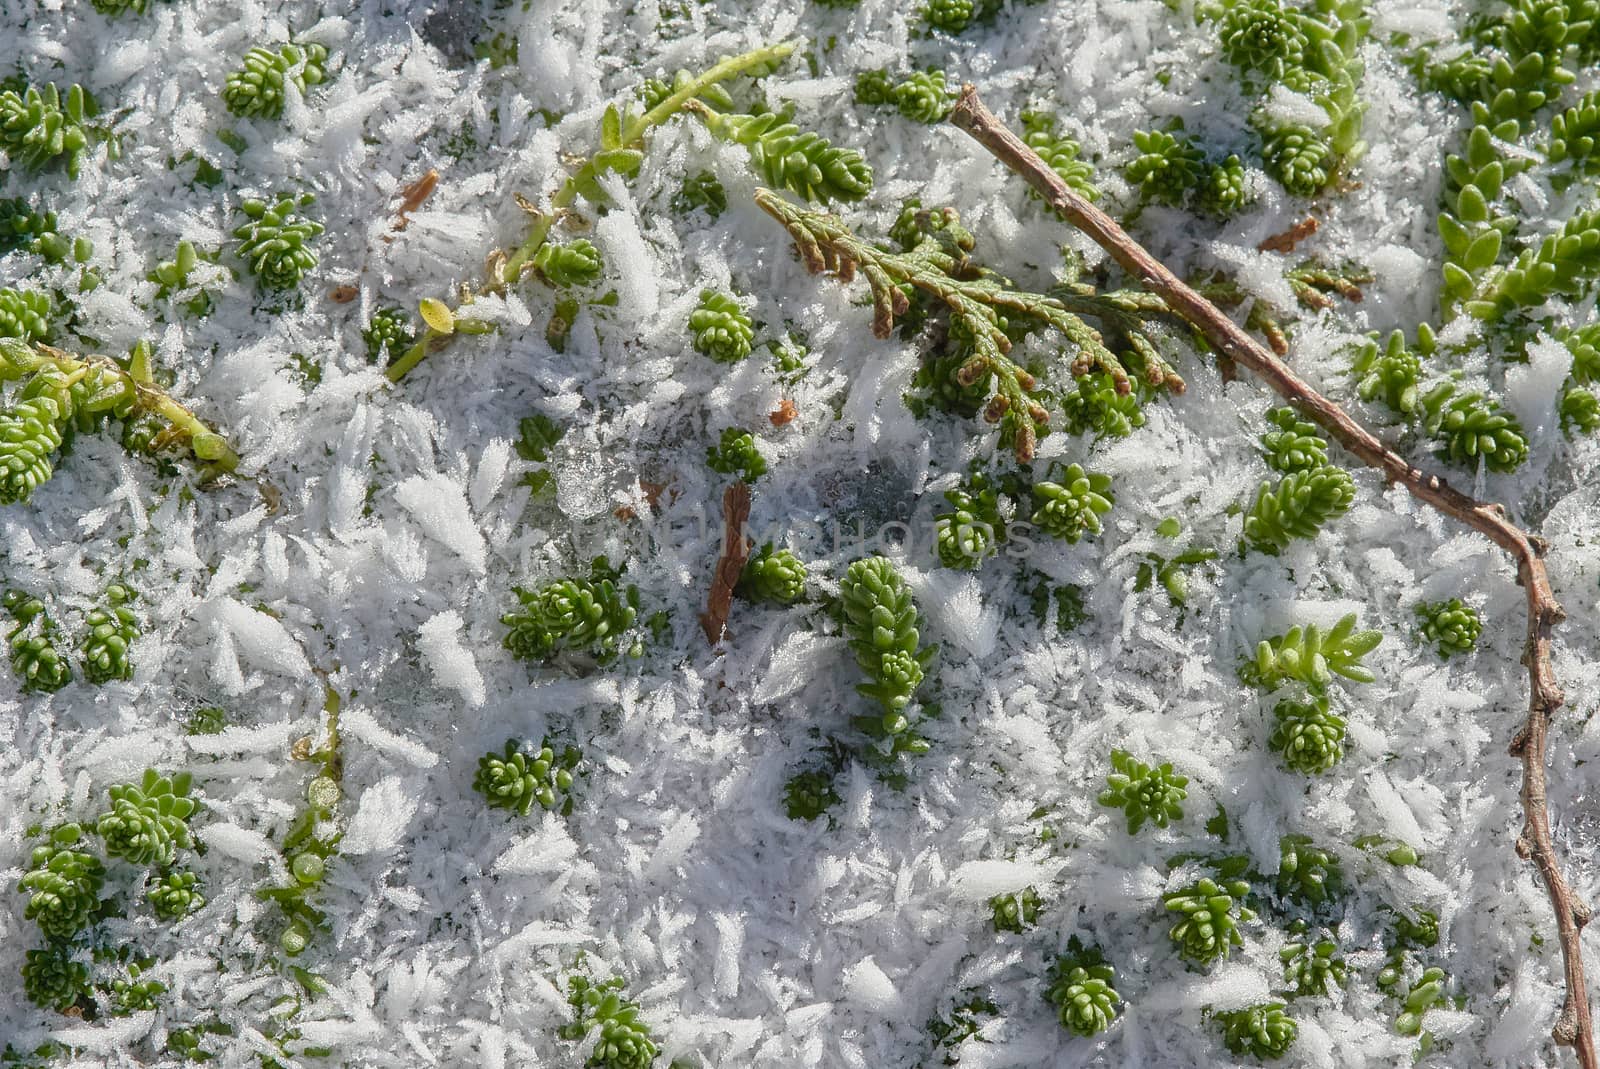 Frozen snow fell on the ground with green grass